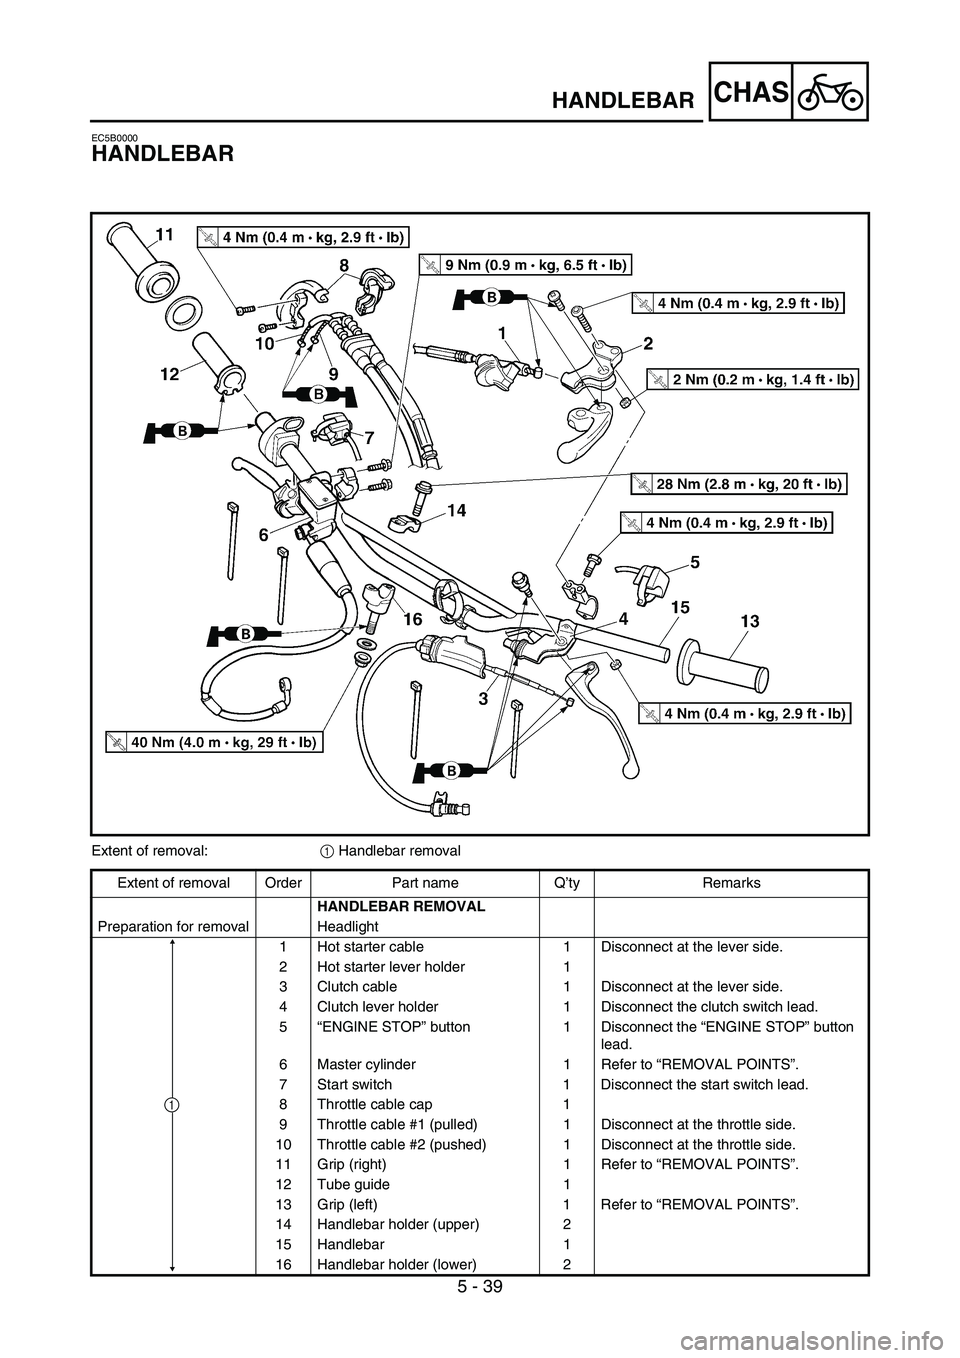 YAMAHA WR 450F 2006  Manuale de Empleo (in Spanish) 5 - 39
CHAS
EC5B0000
HANDLEBAR
Extent of removal:
1 Handlebar removal
Extent of removal Order Part name Q’ty Remarks
HANDLEBAR REMOVAL
Preparation for removal Headlight
1 Hot starter cable  1 Discon